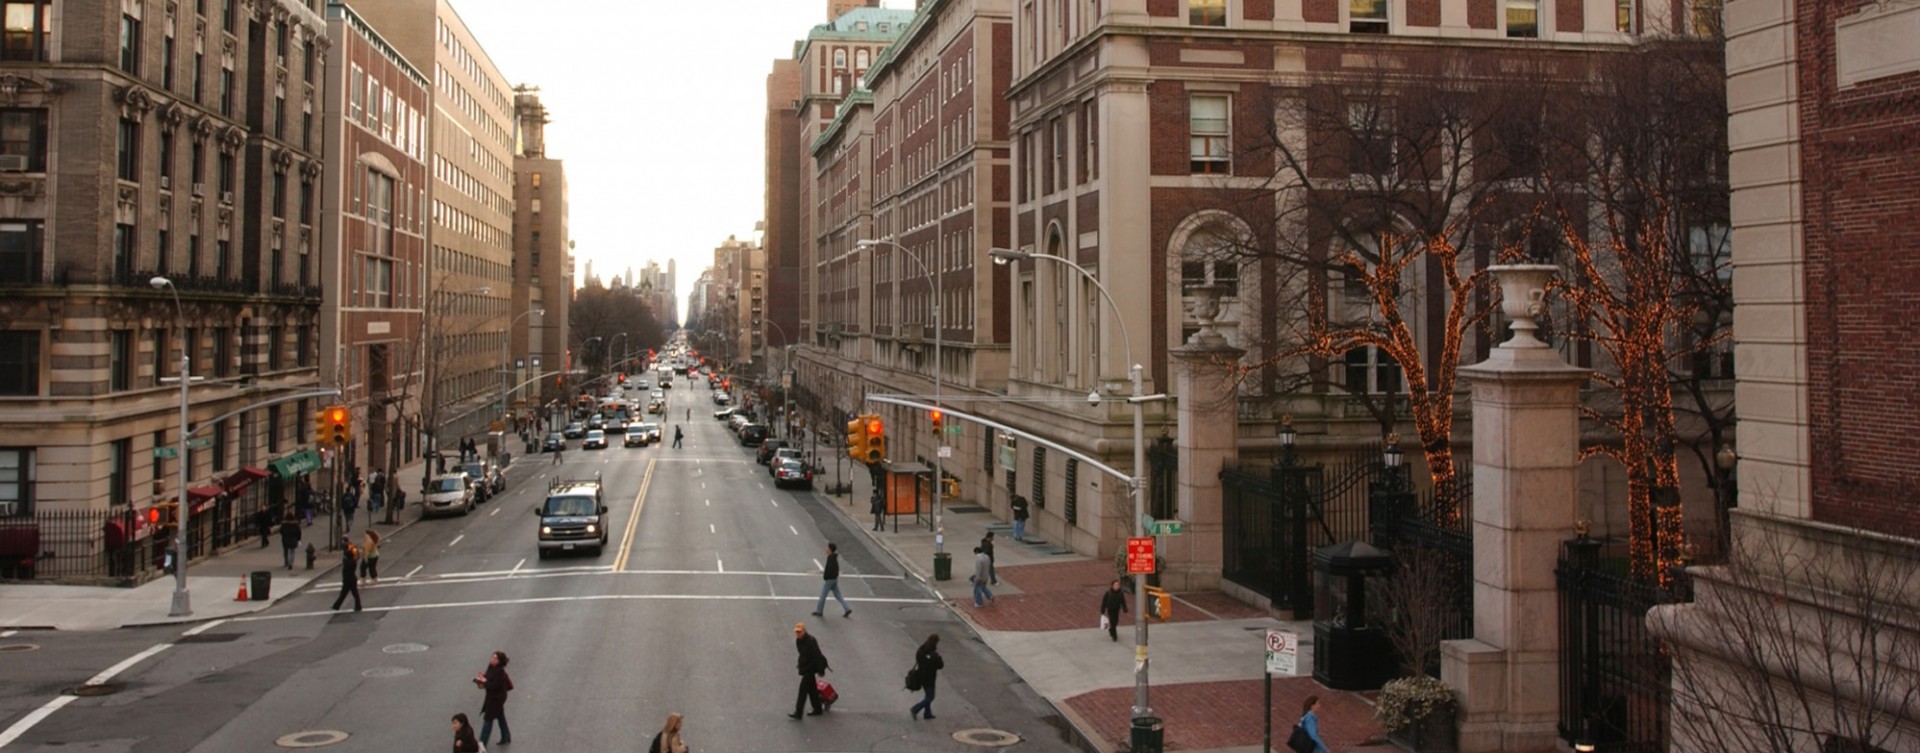 Amsterdam Ave as seen from Columbia Law School